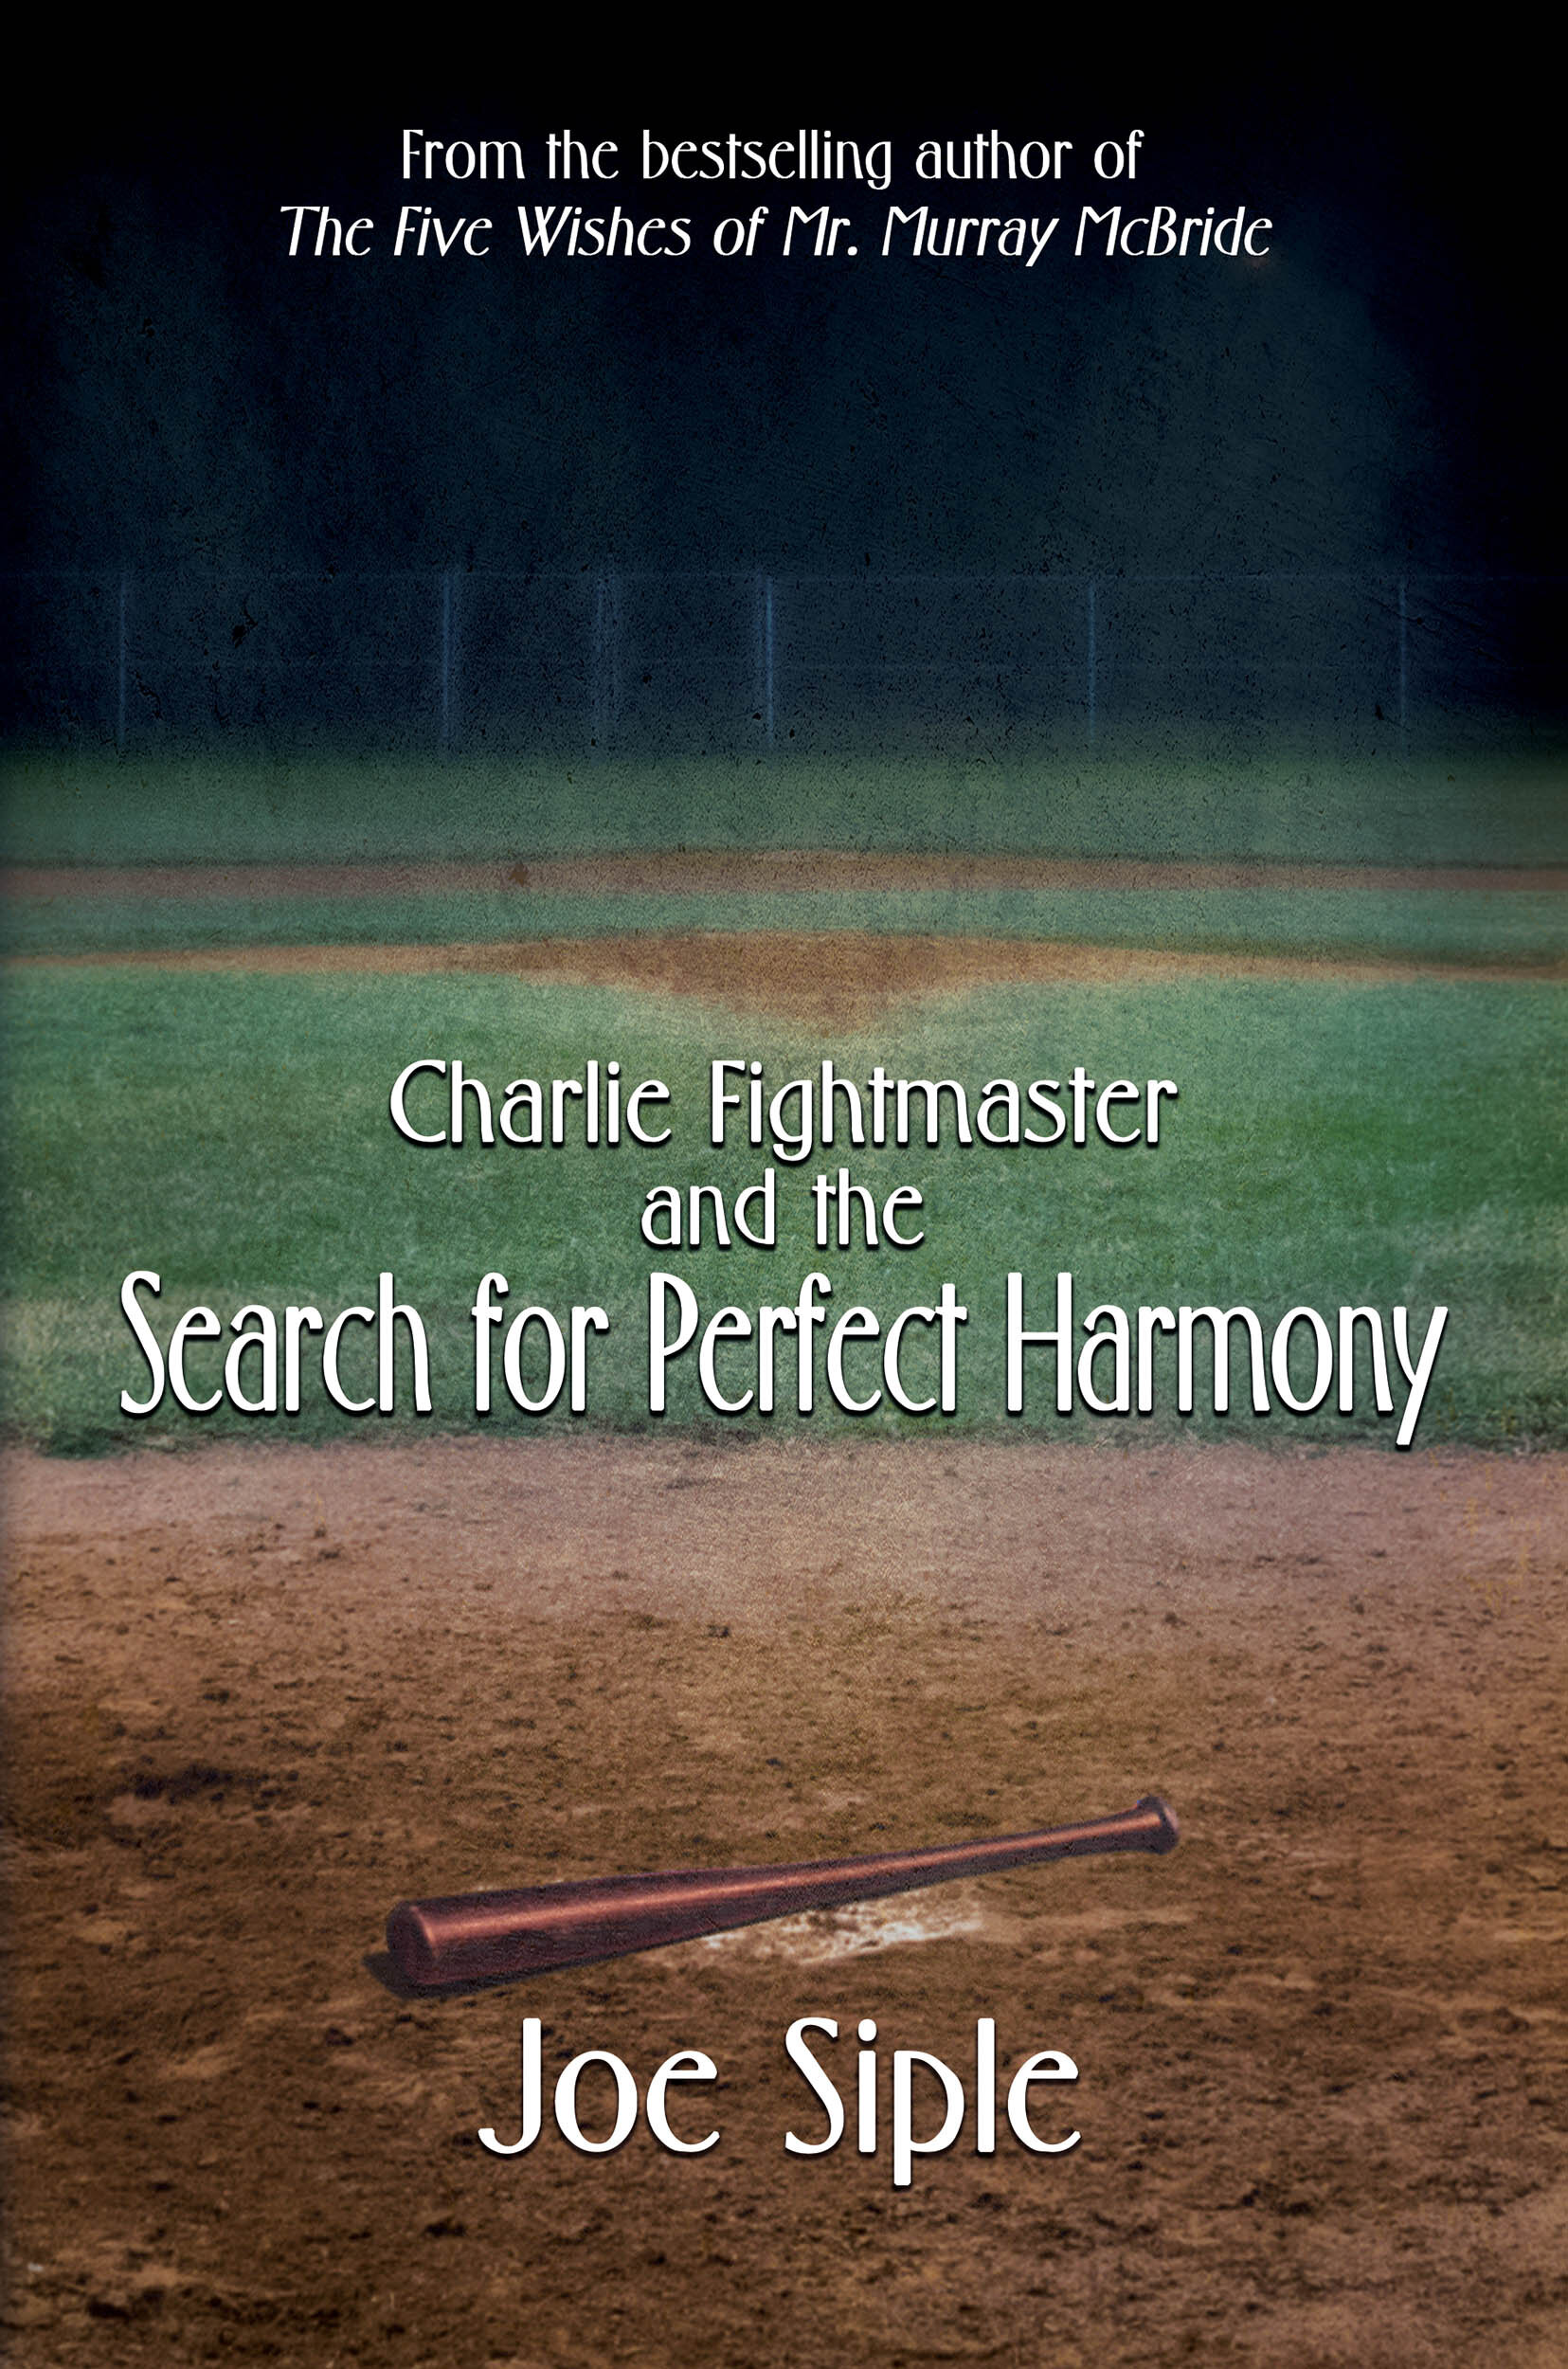 Charlie Fightmaster and The Search for Perfect Harmony